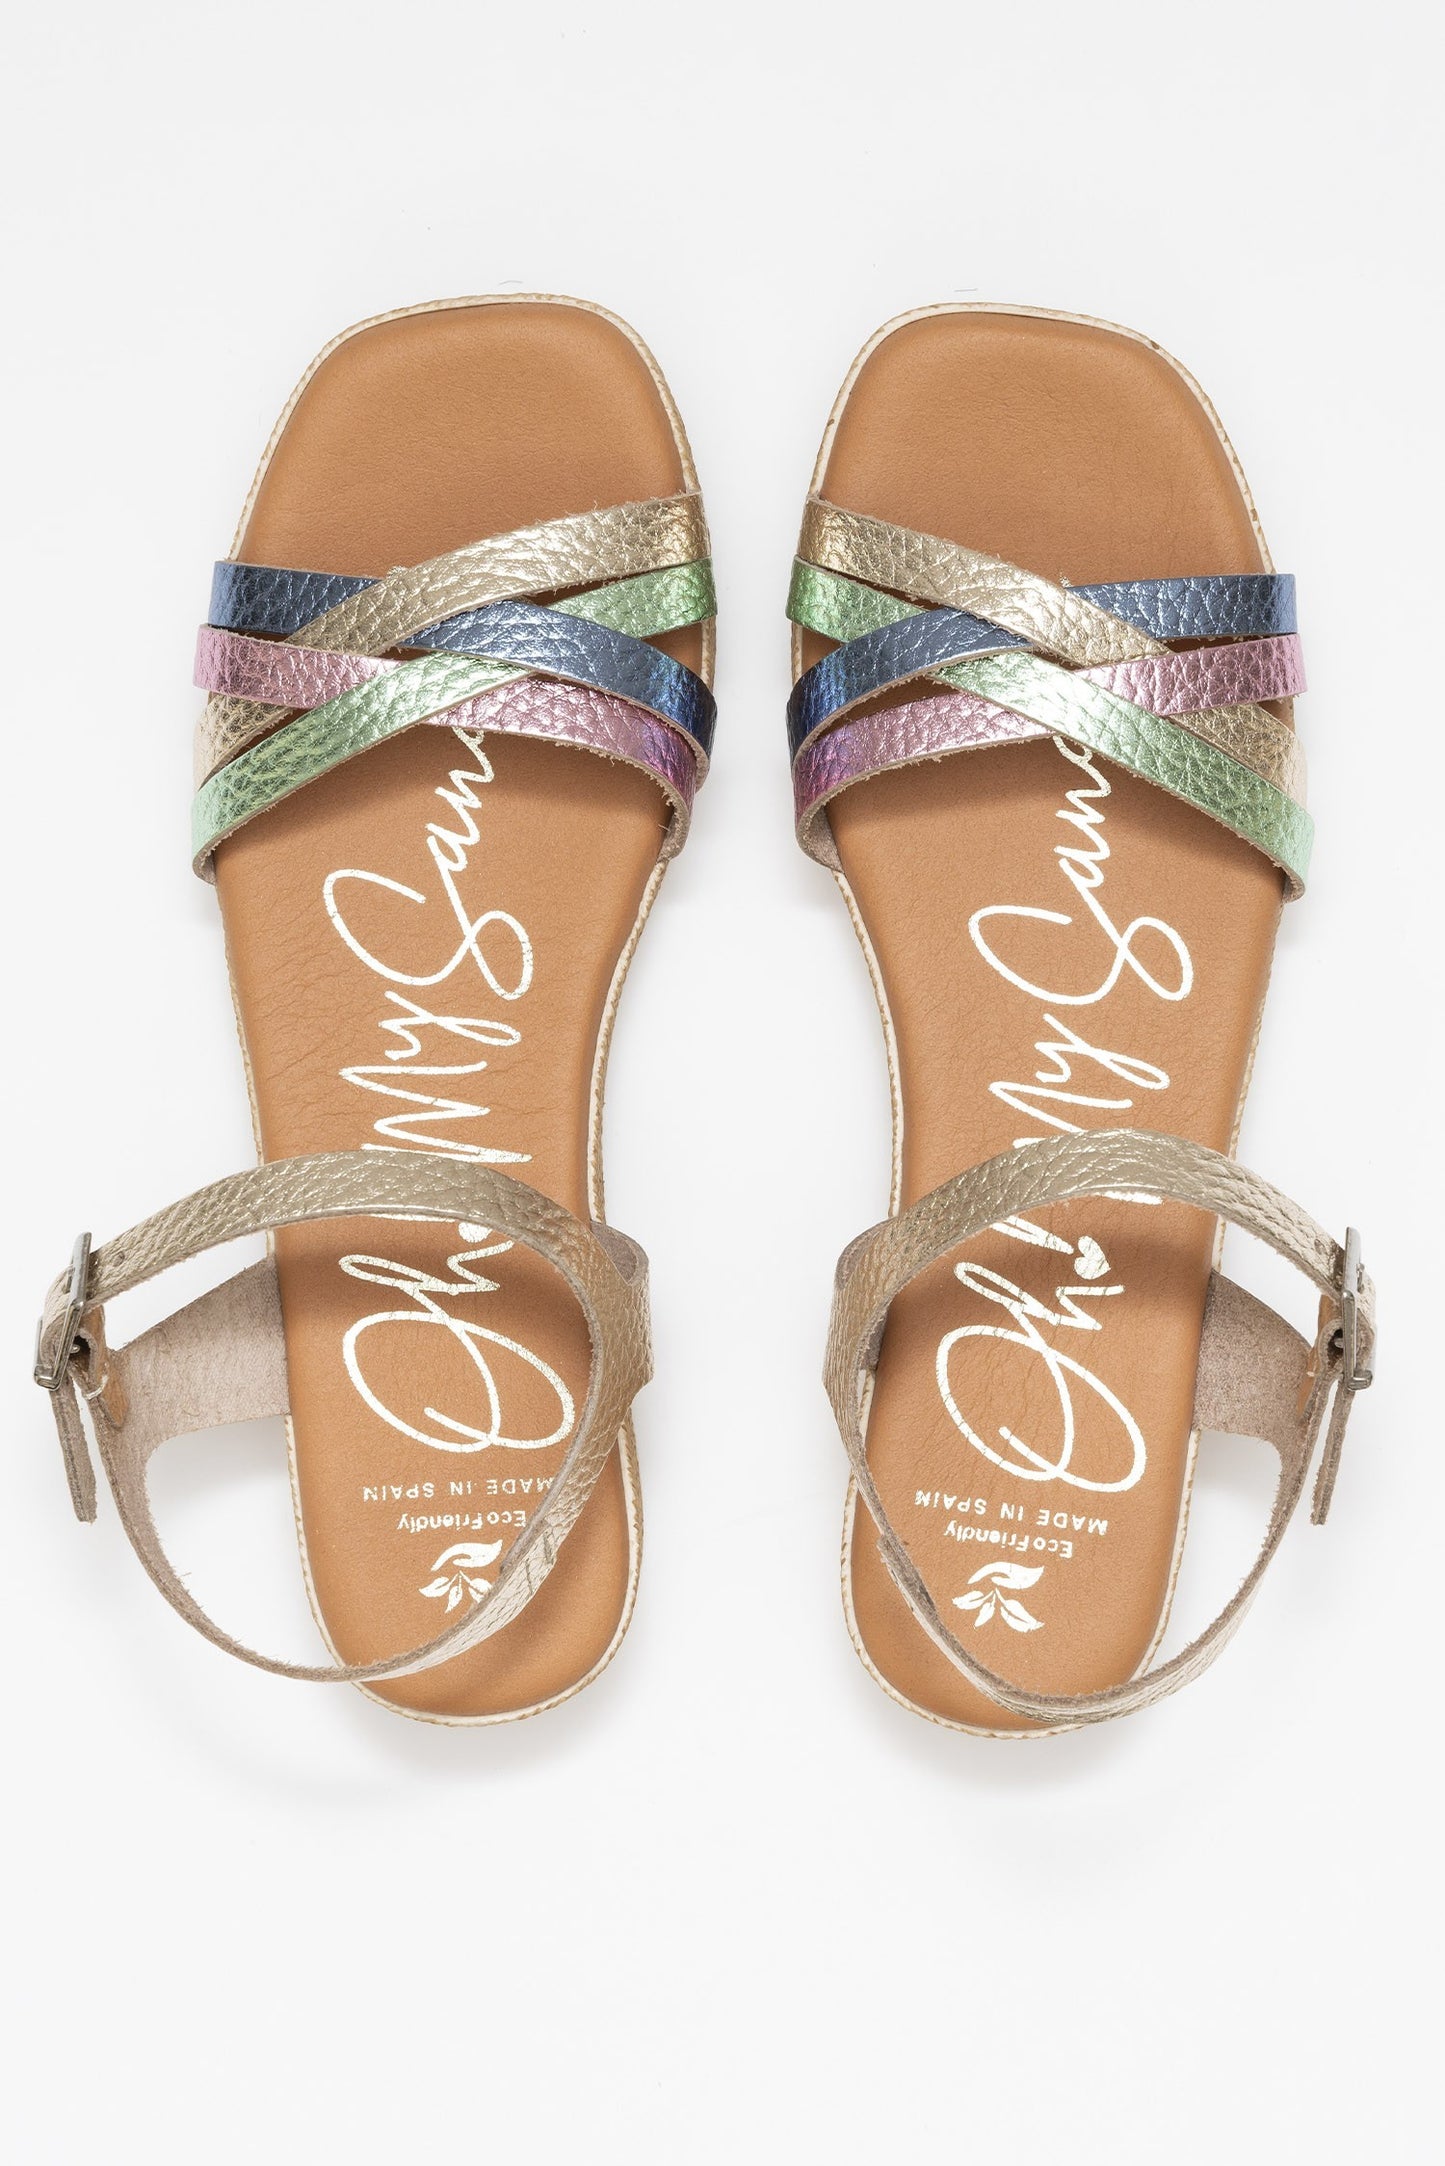 OH MY SANDALS 5425